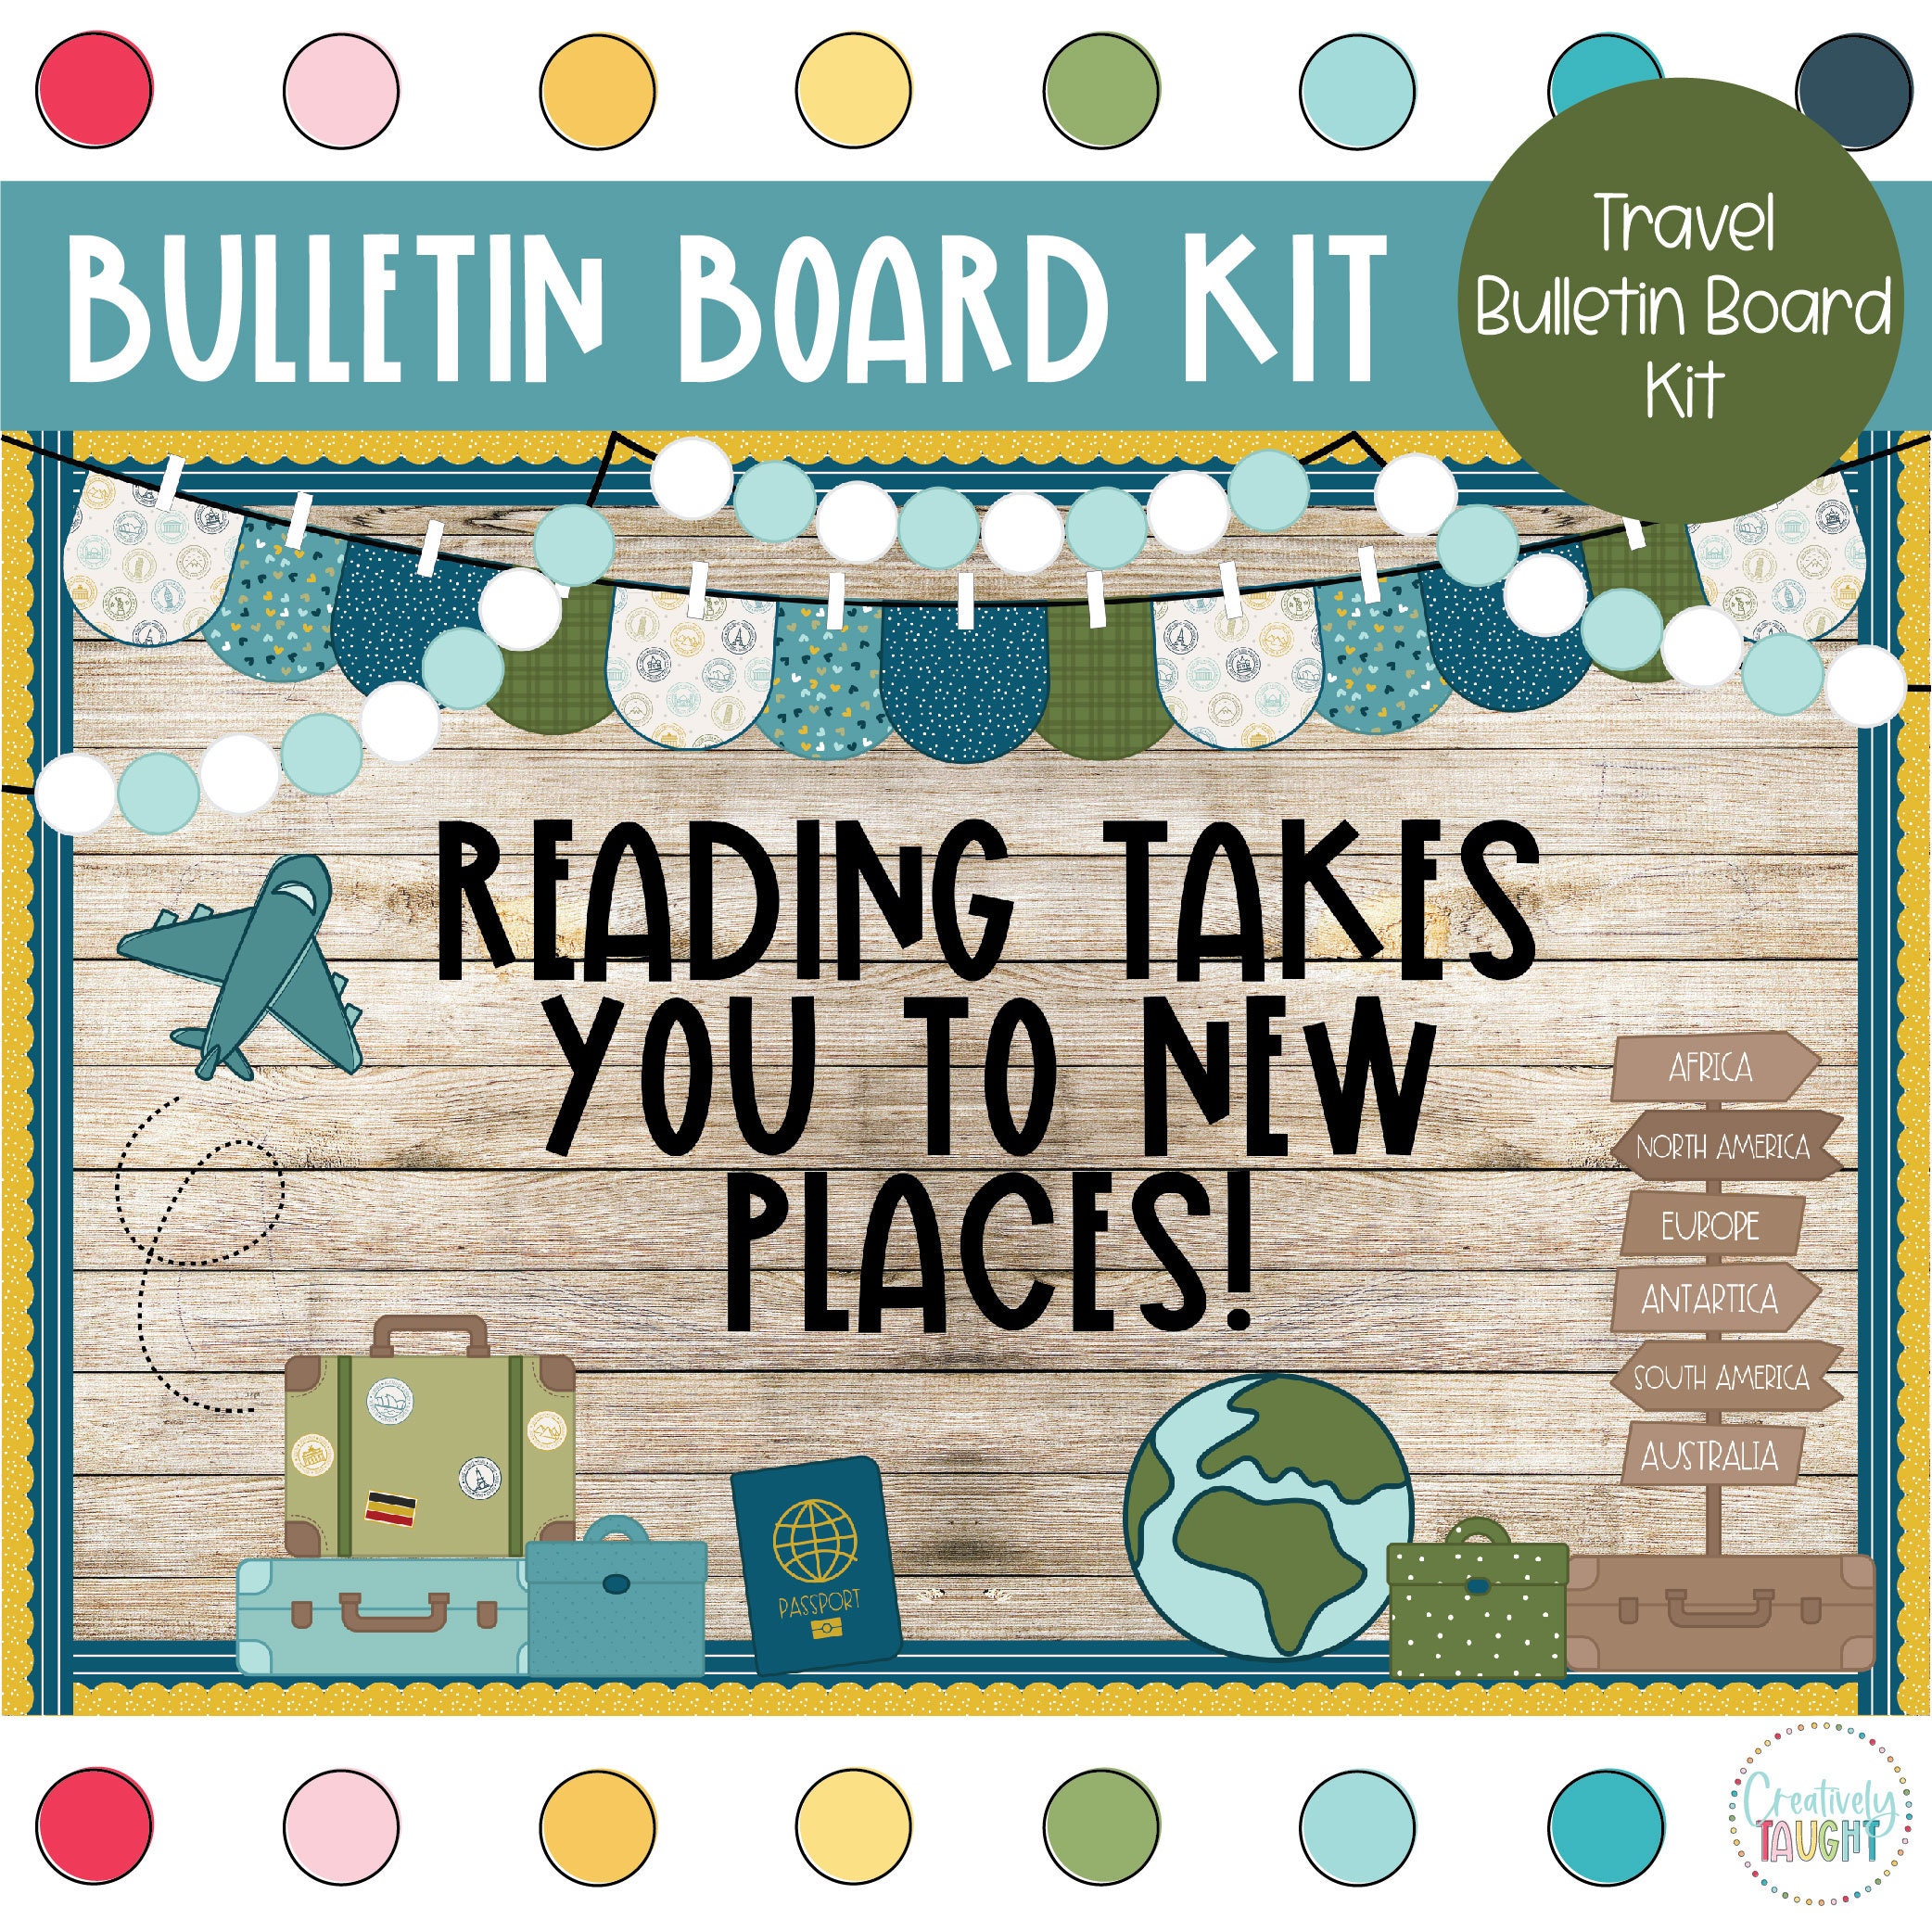 How to Use a Cricut to Cut Out Bulletin Board Pieces - Mama Teaches